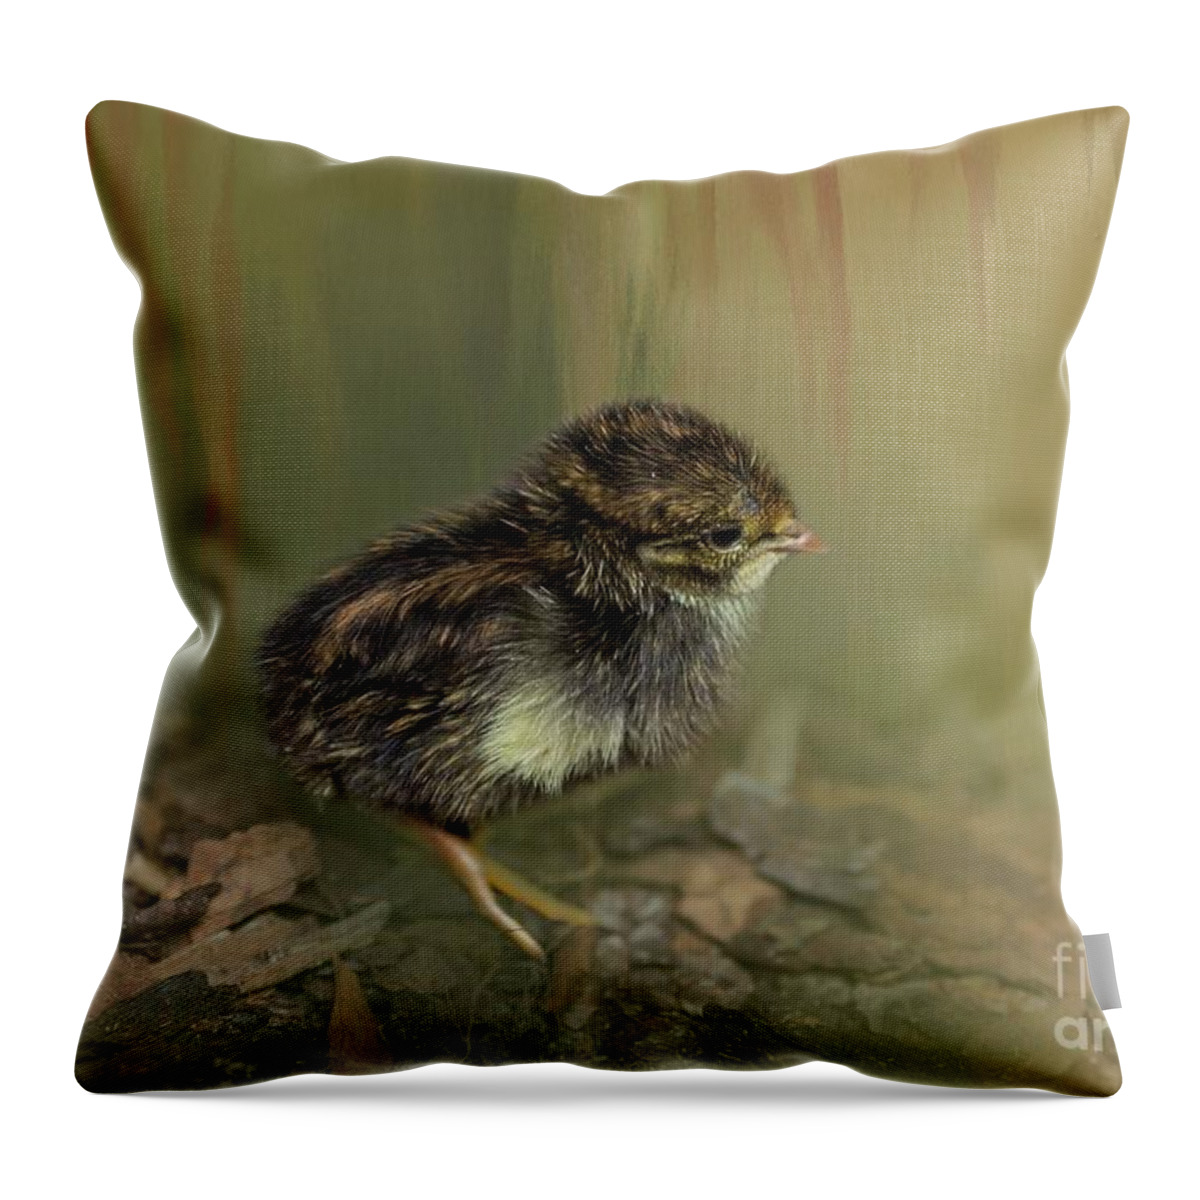 King Quail Throw Pillow featuring the photograph King Quail Chick by Eva Lechner